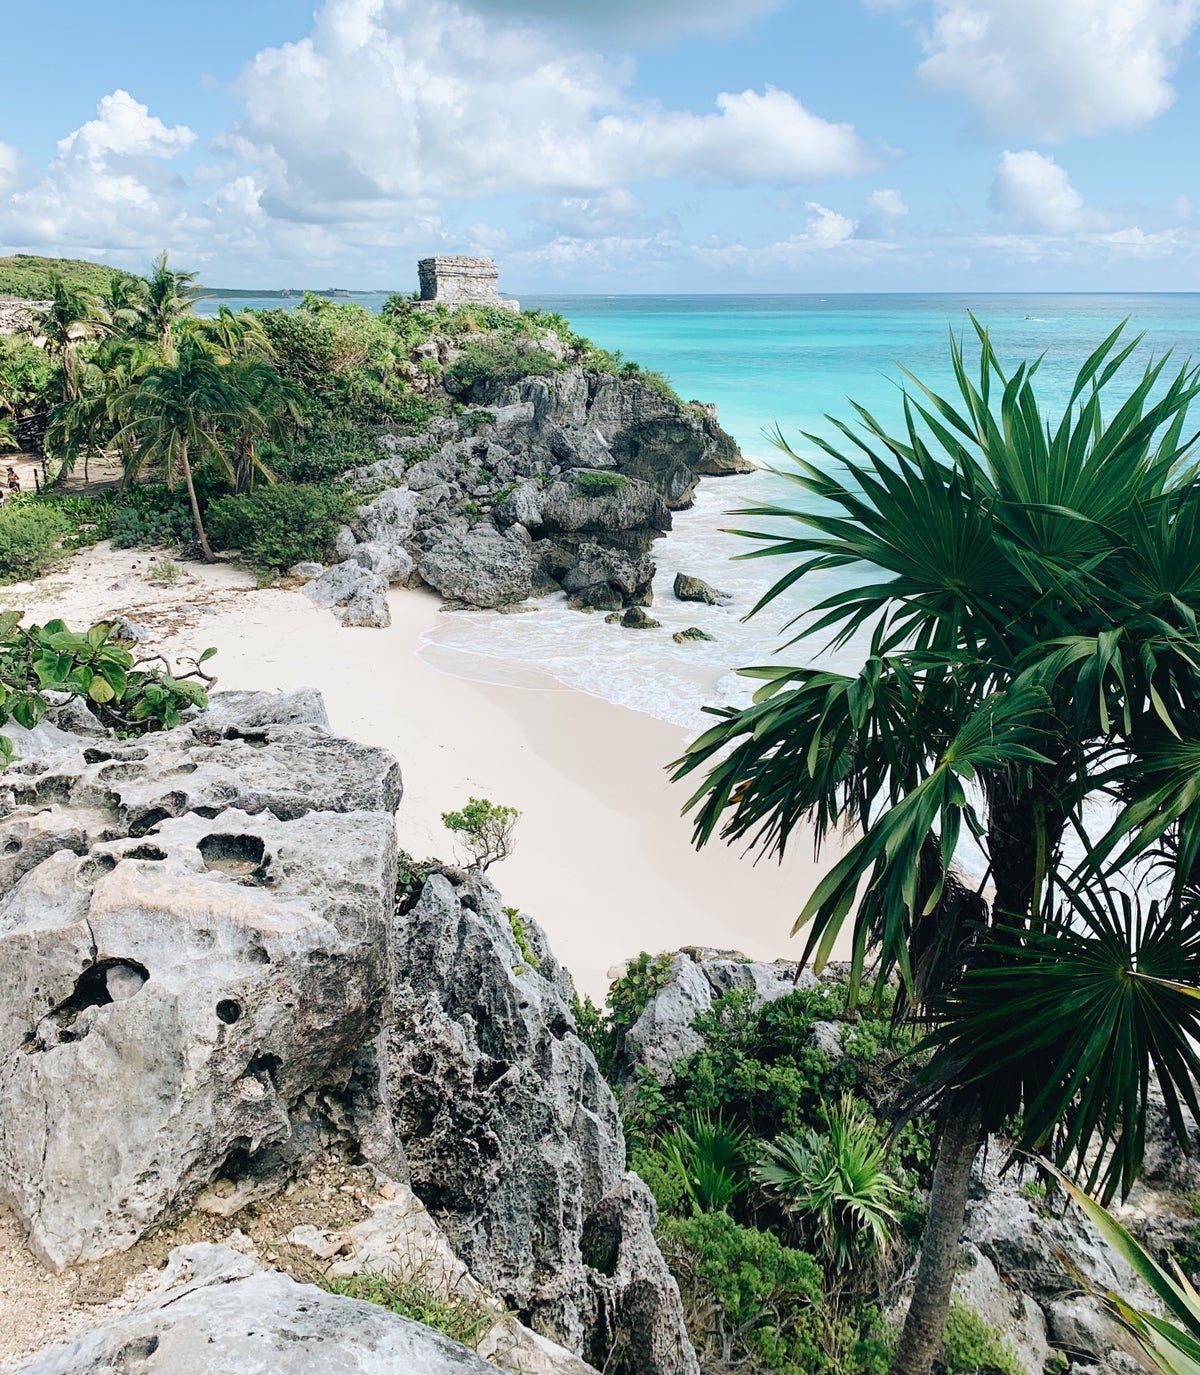 Delta Puts New Tulum Airport on the Map With Nonstop Service From Atlanta